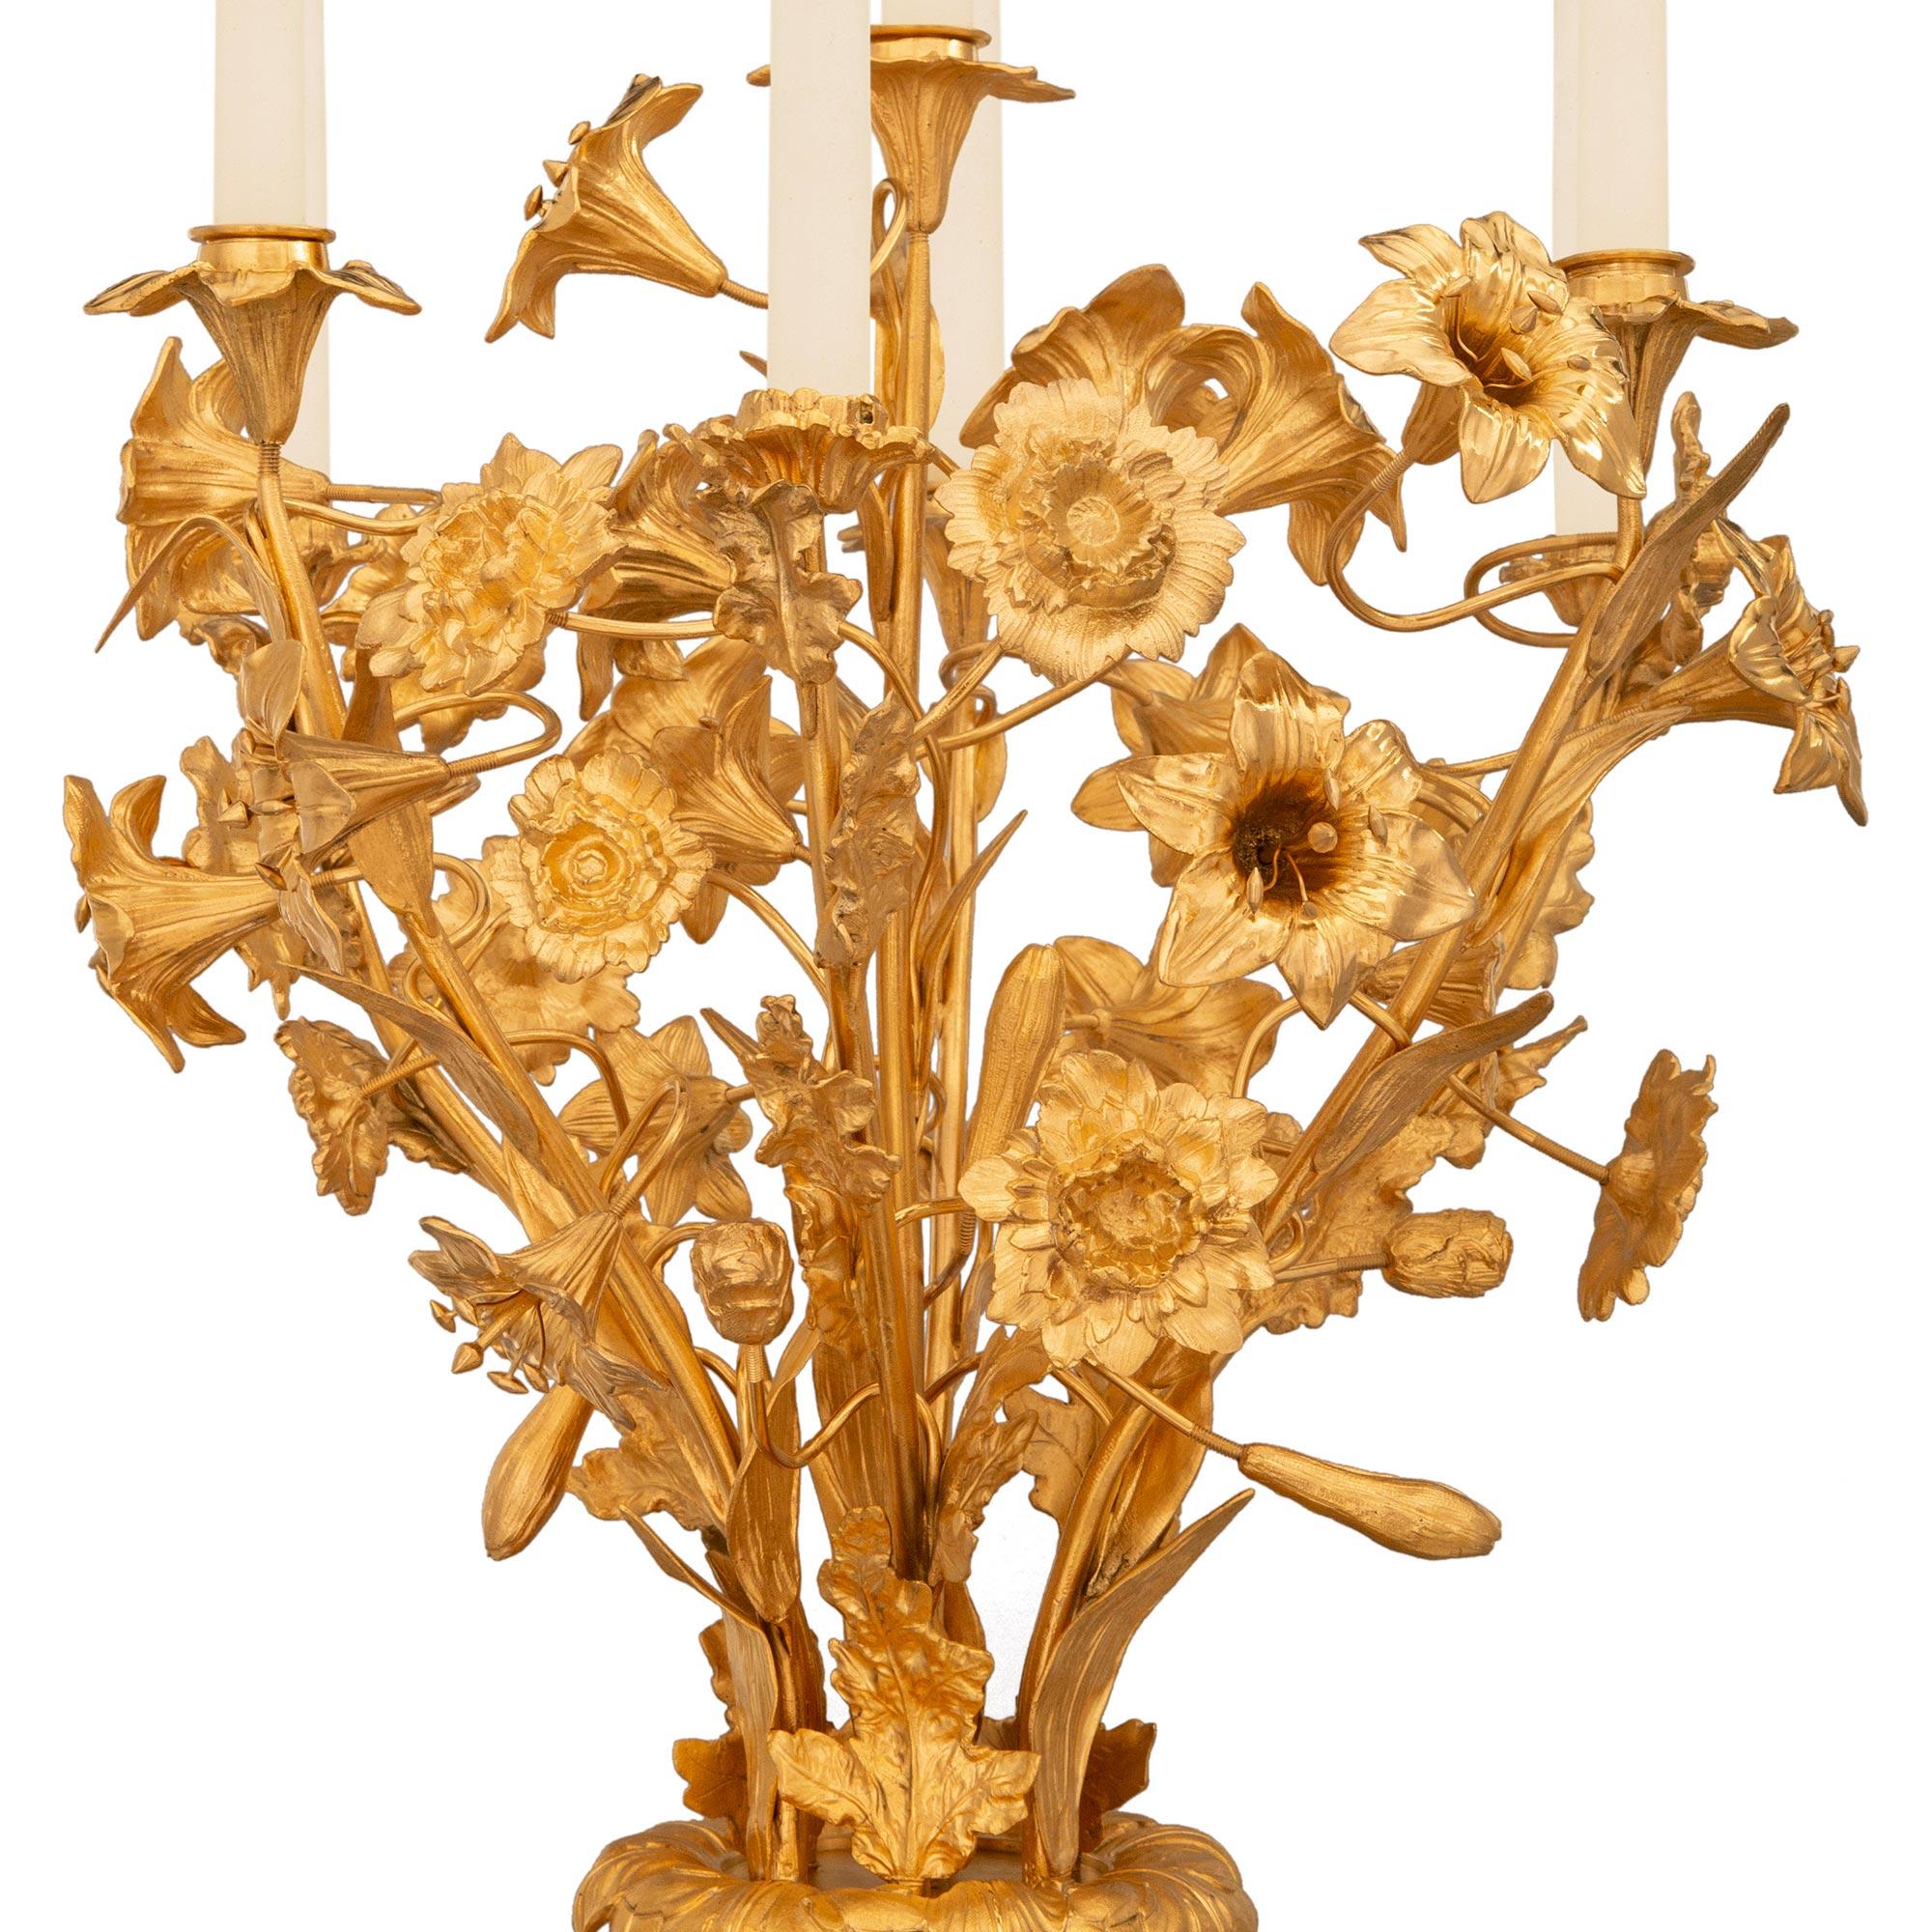 An impressive and large scale pair of French 19th century Louis XVI st. Sèvres Porcelain and Ormolu candelabras. The richly decorated pair of seven arm candelabras are supported by four beautiful “C” scrolled acanthus leaf supports flanked by